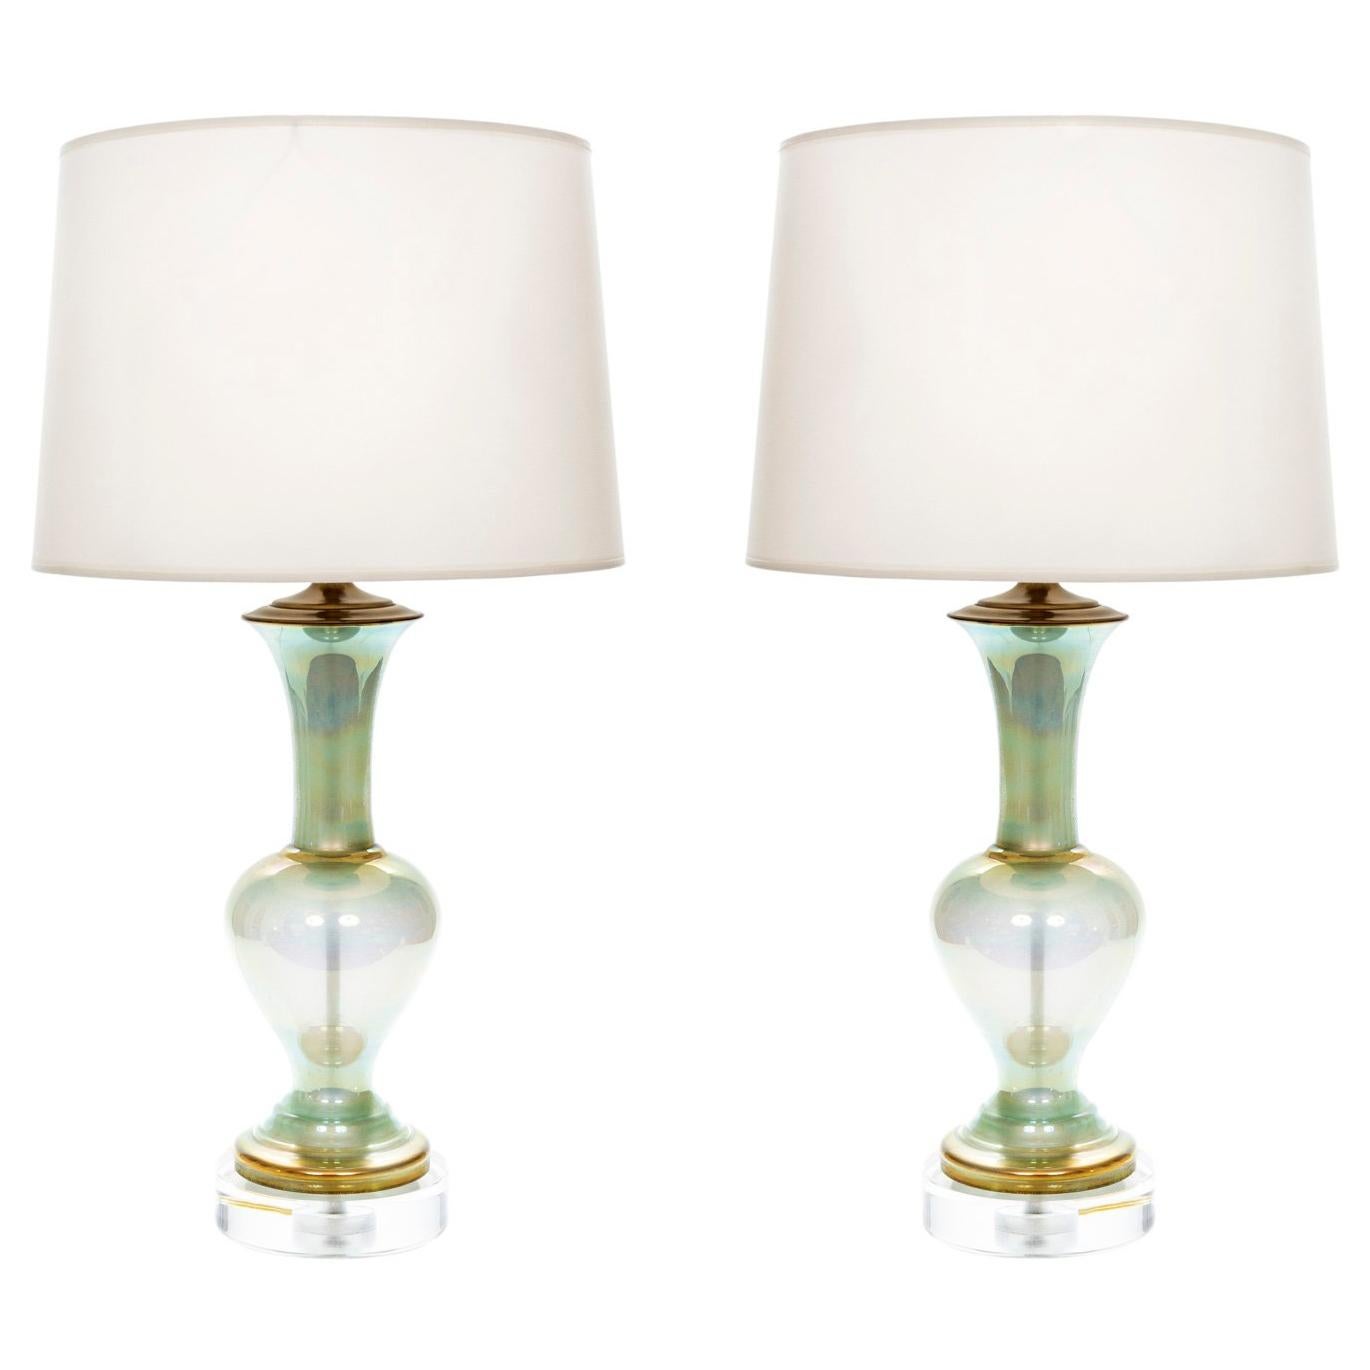 Pair of Vintage Celadon Iridescent Glass Table Lamps on Brass Base